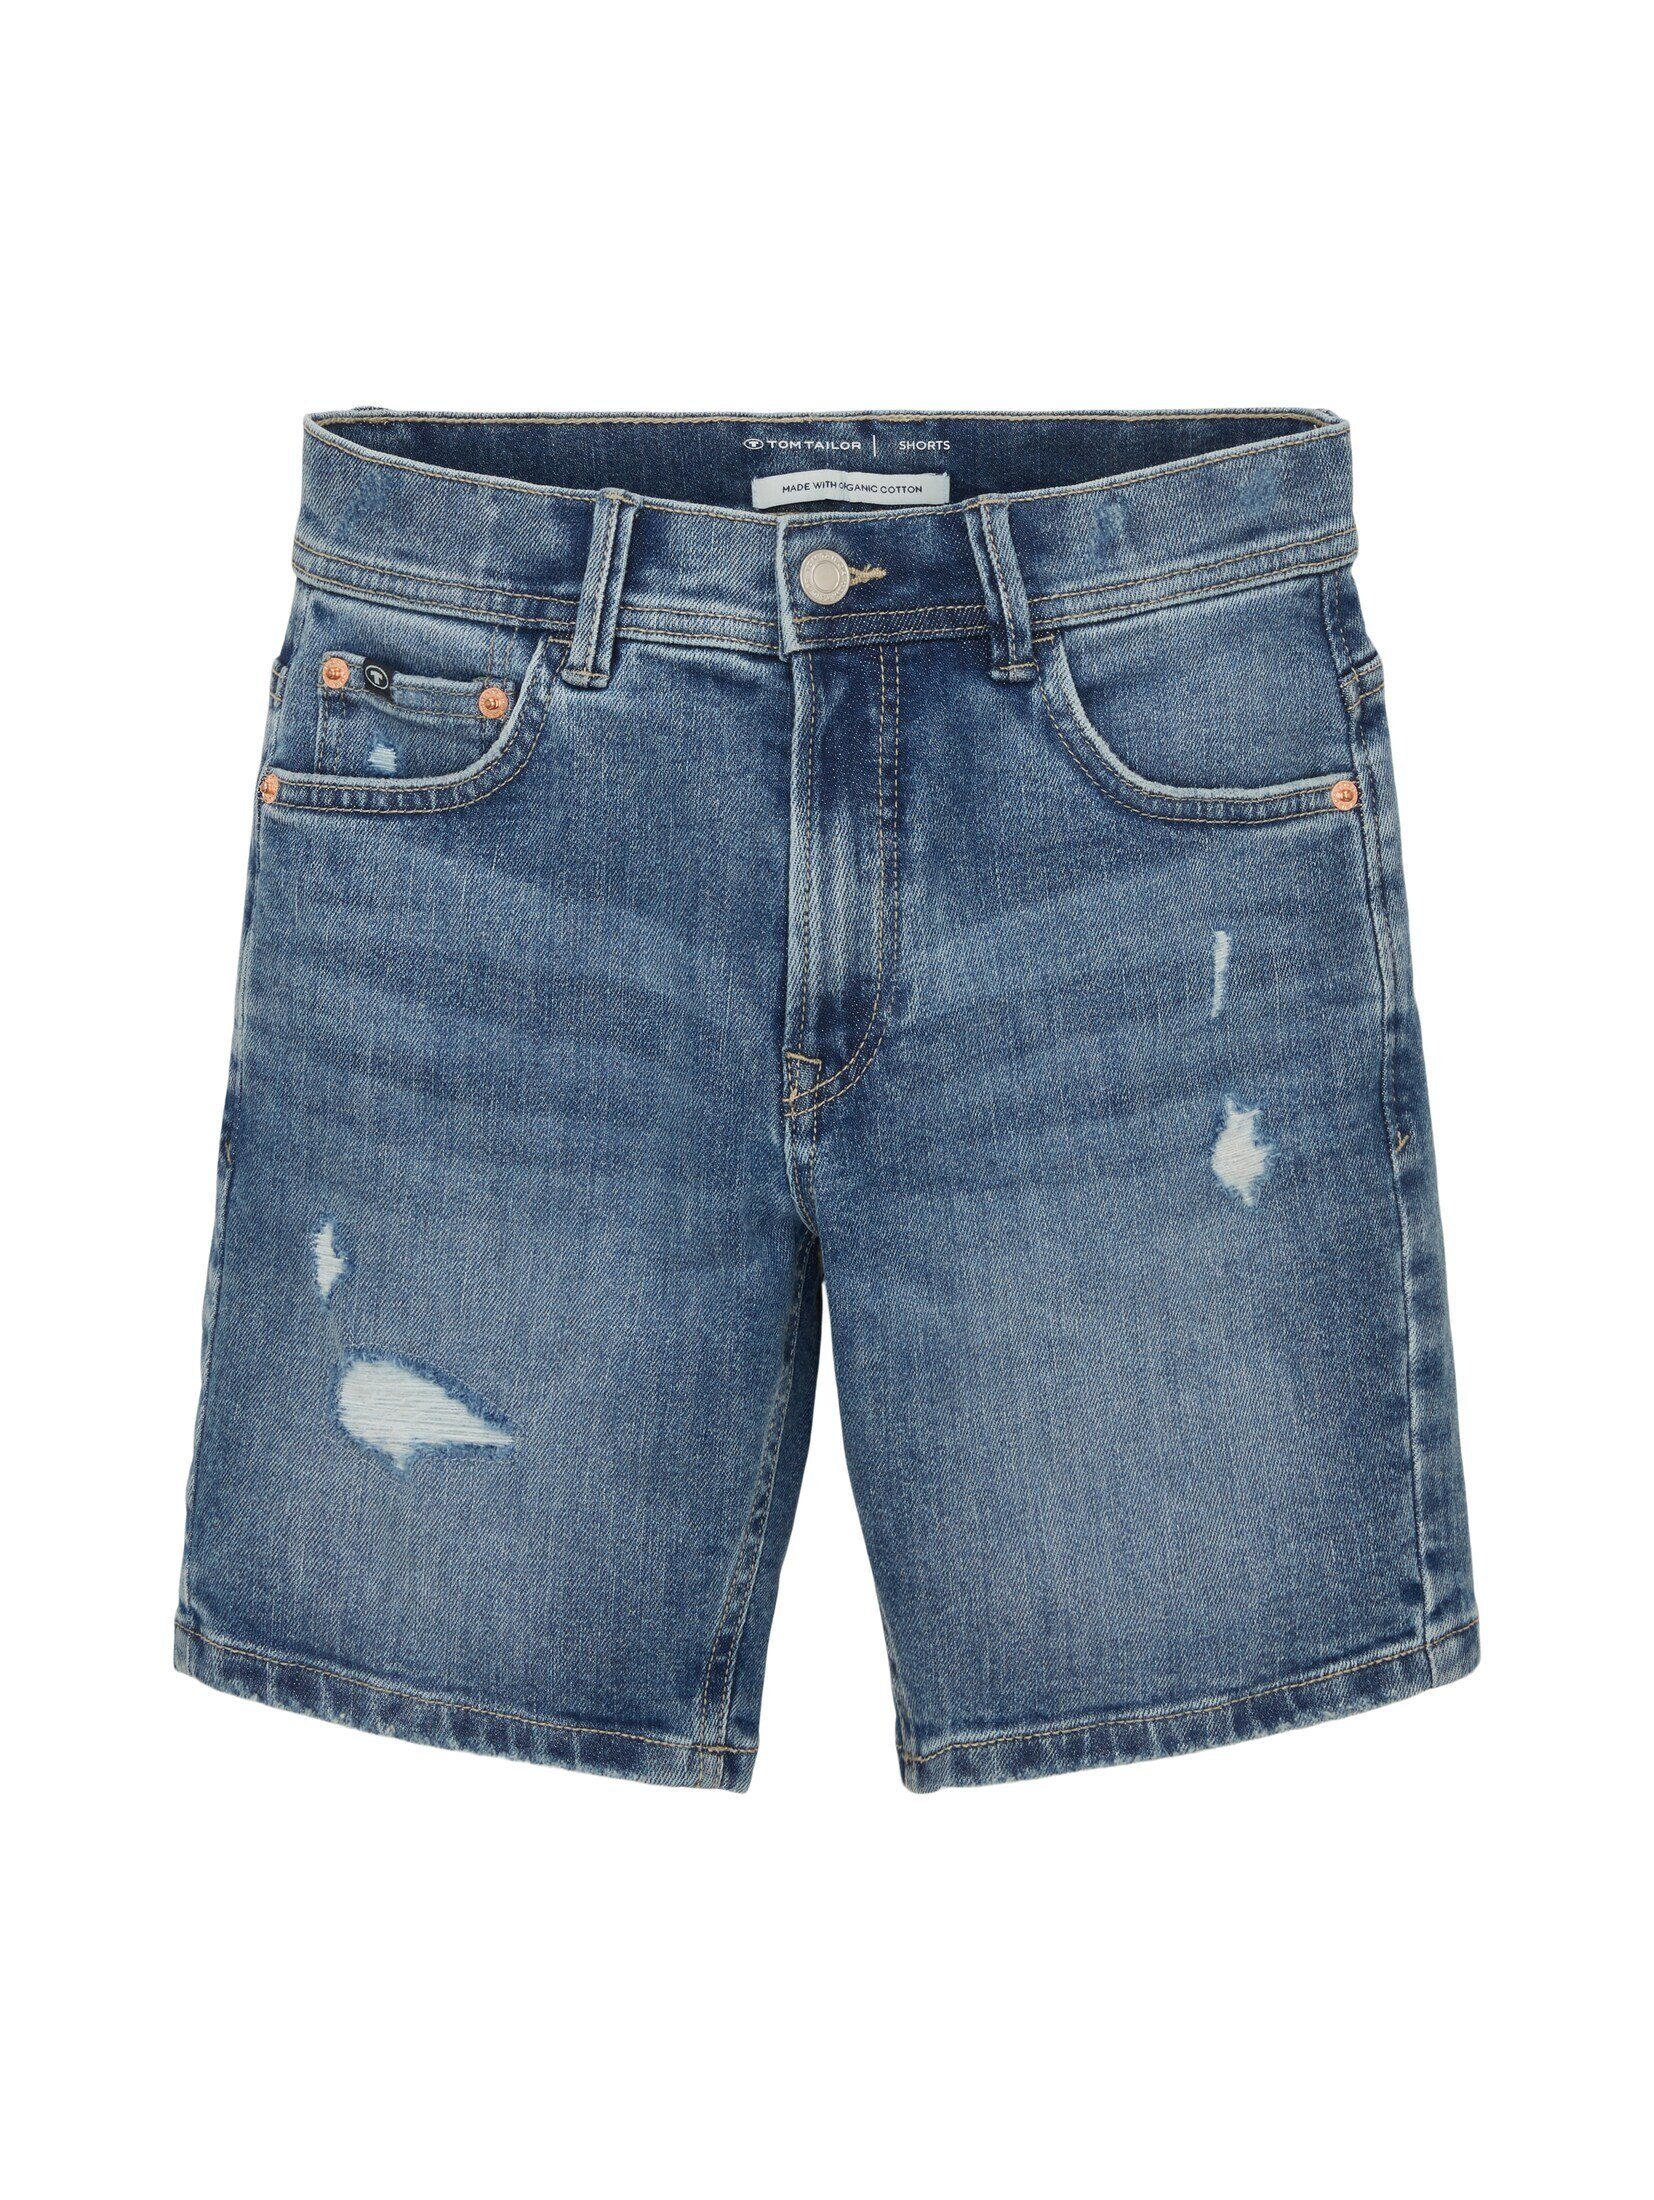 TOM TAILOR Jeansshorts Jeansshorts im Used-Look